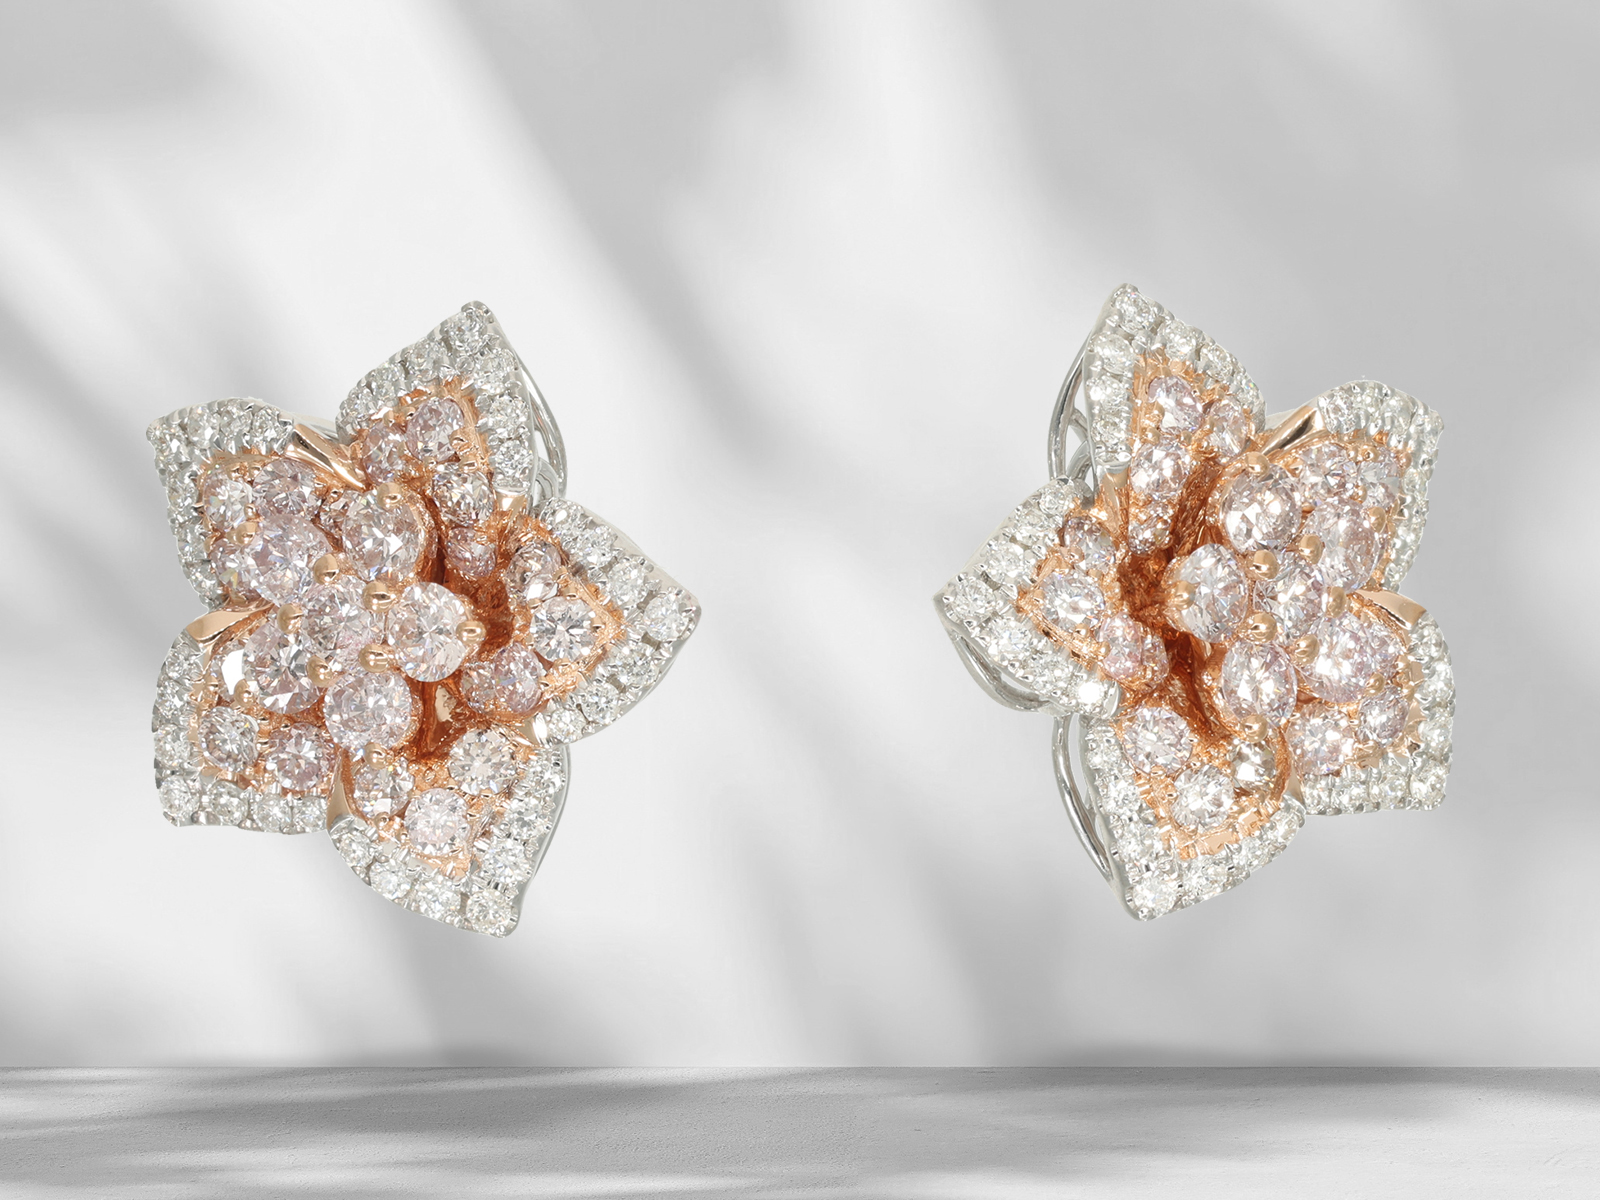 Earrings: modern diamond flower stud earrings with pink and white brilliant-cut diamonds, like new - Image 4 of 6